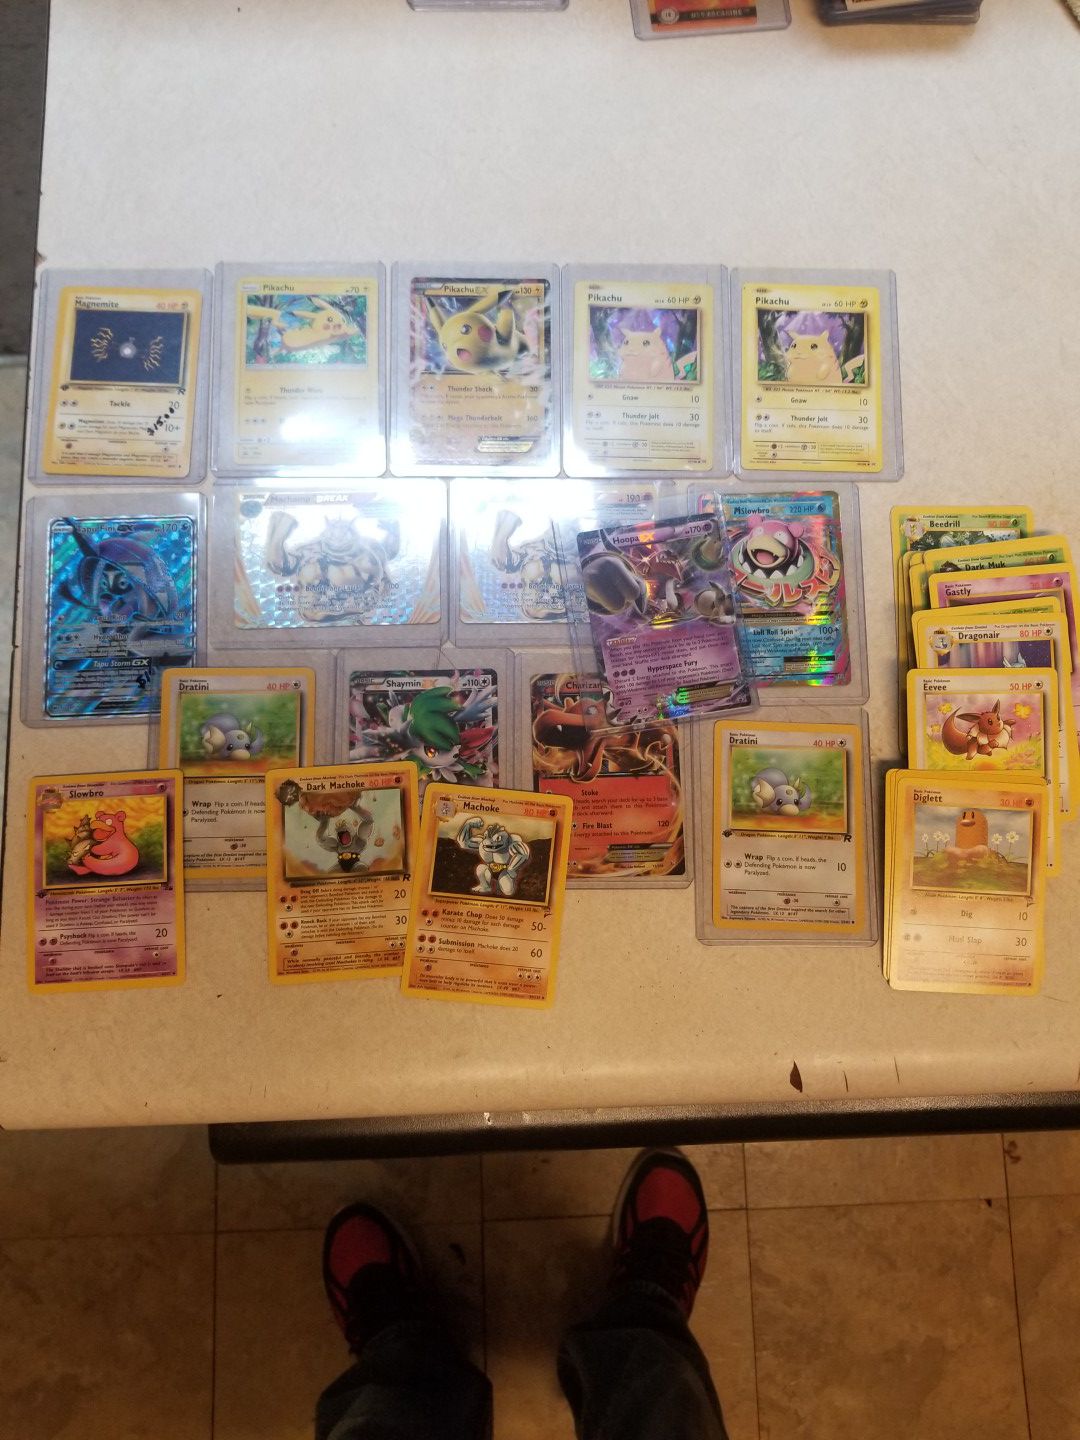 Pokemon cards 1st edition years 1999/2000 many great cards